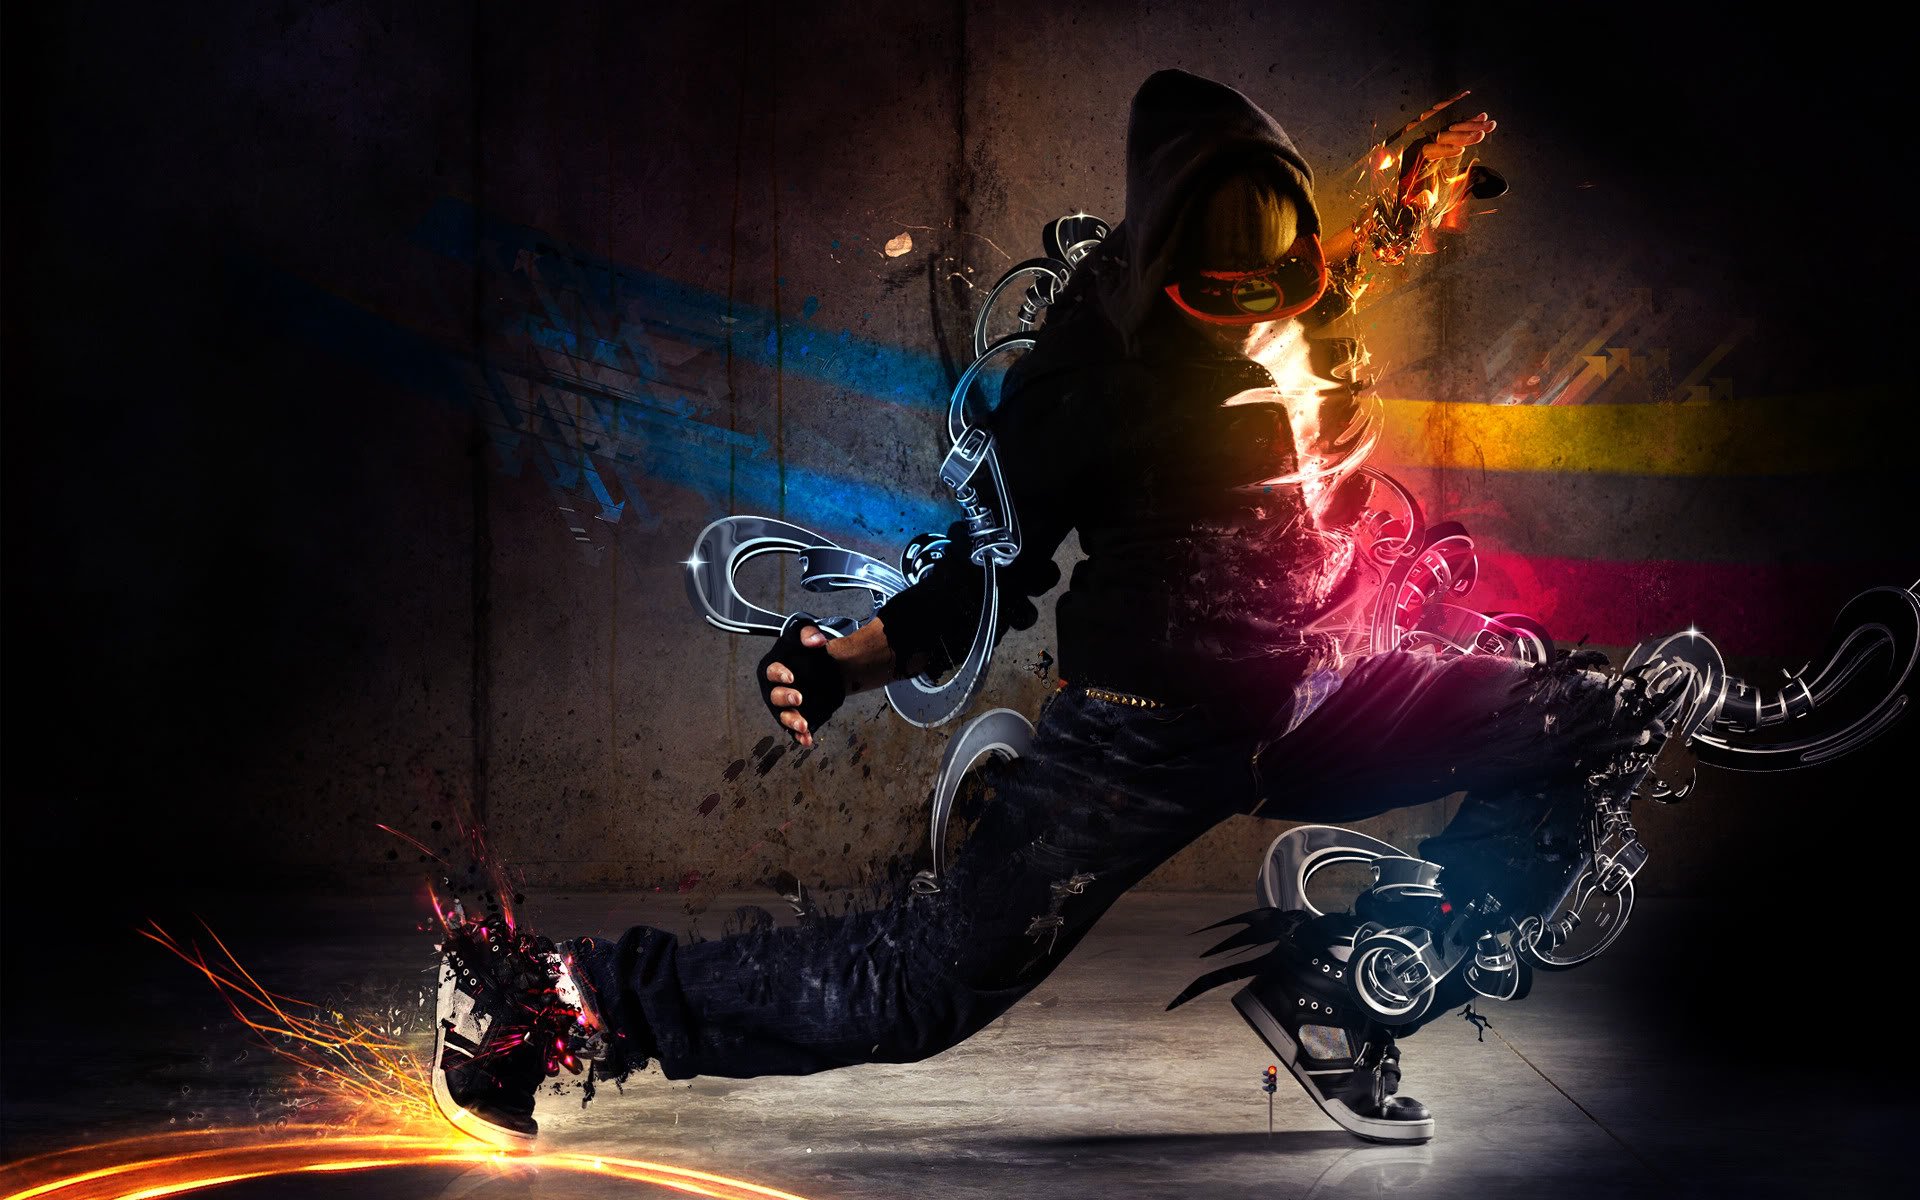 Download Cool HD Wallpapers For Boys Break Dance pictures in high